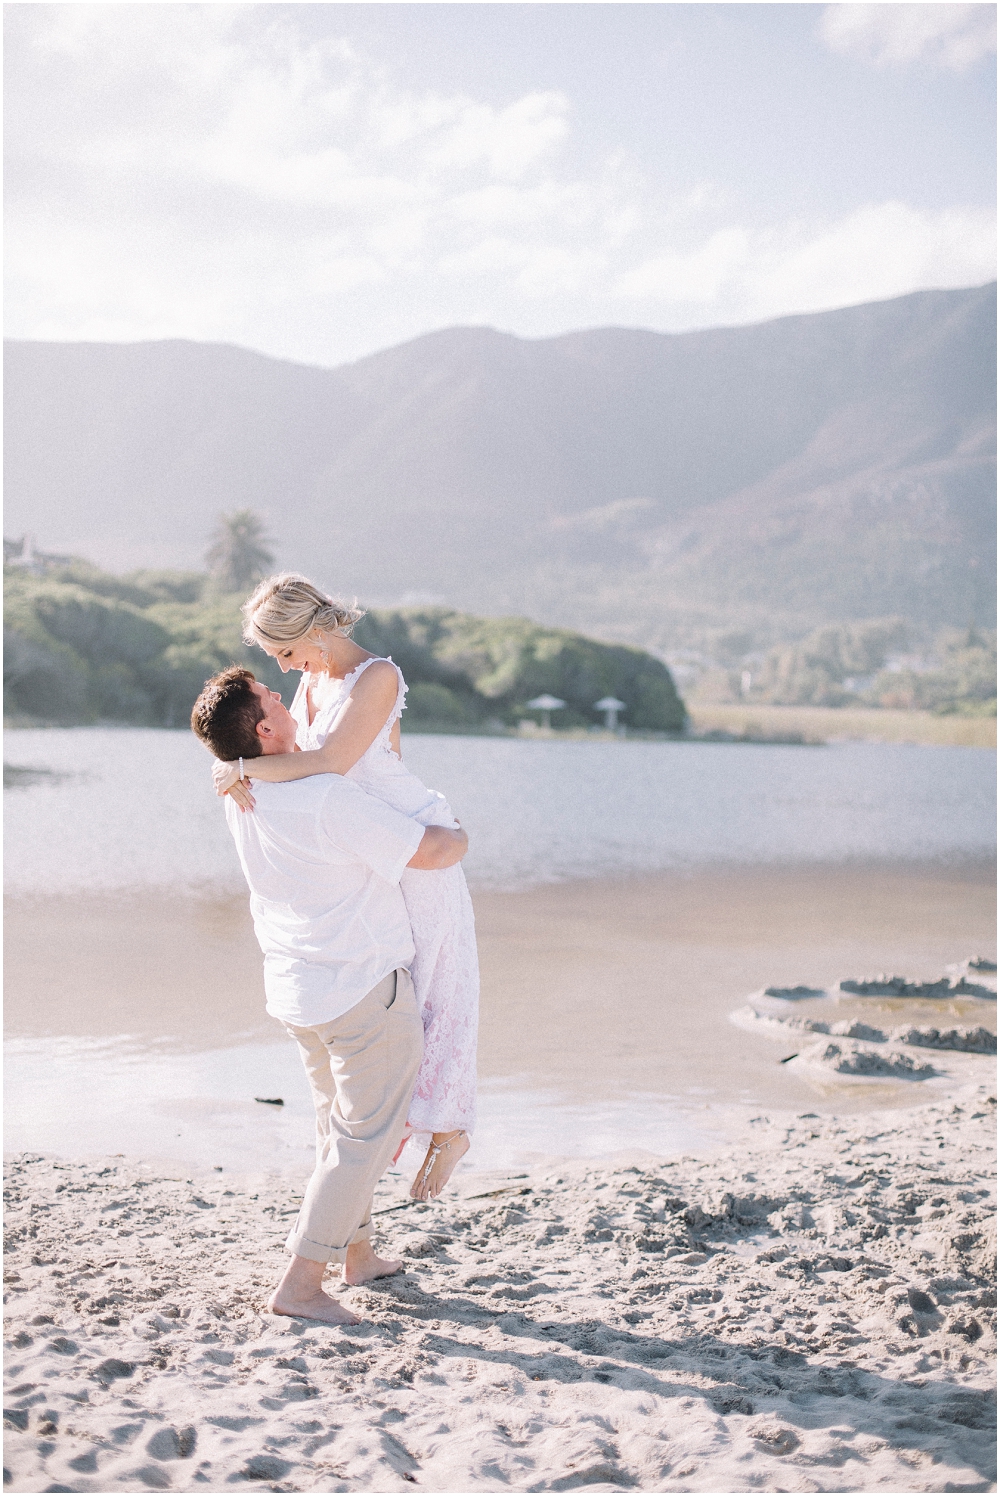 Western Cape Wedding Photographer Ronel Kruger Photography Cape Town_4043.jpg